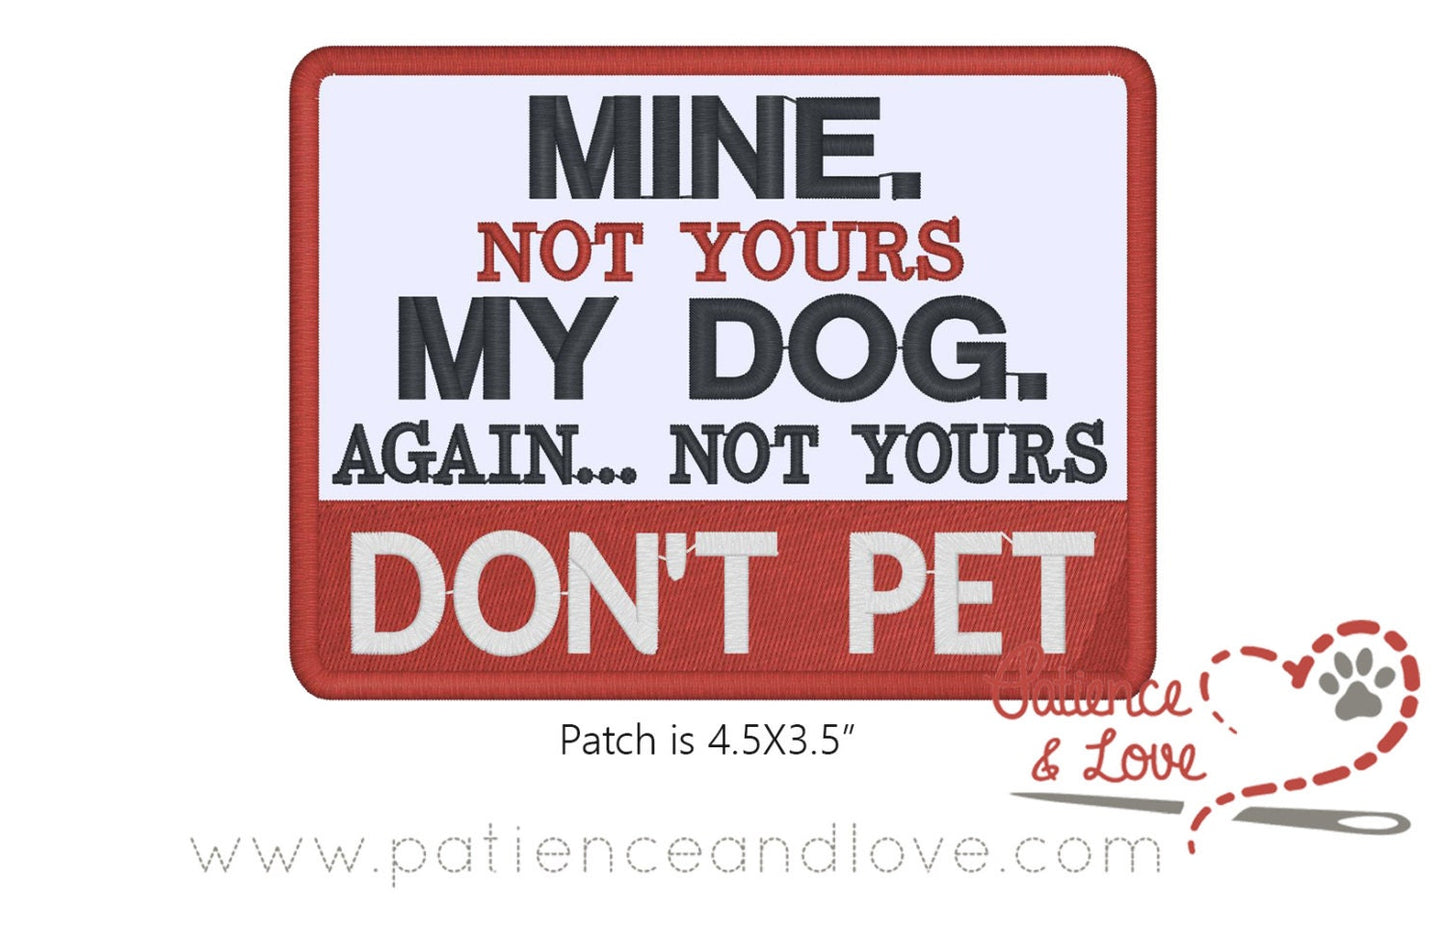 Mine - not yours - MY DOG - again... not yours - Don't Pet, 4.5 x 3.5 embroidered patch